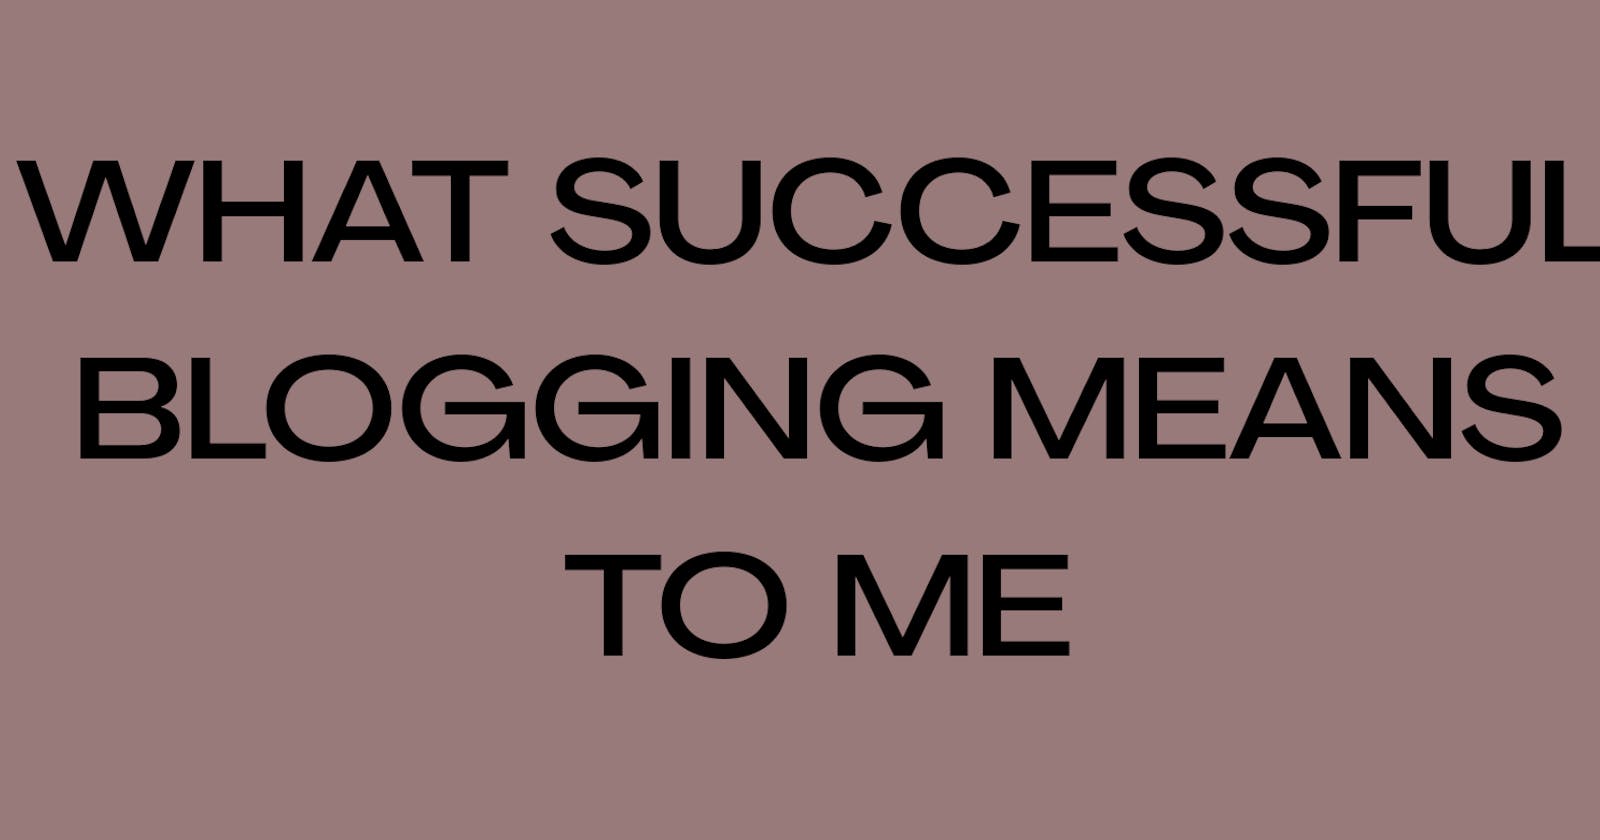 What Successful Blogging means to me